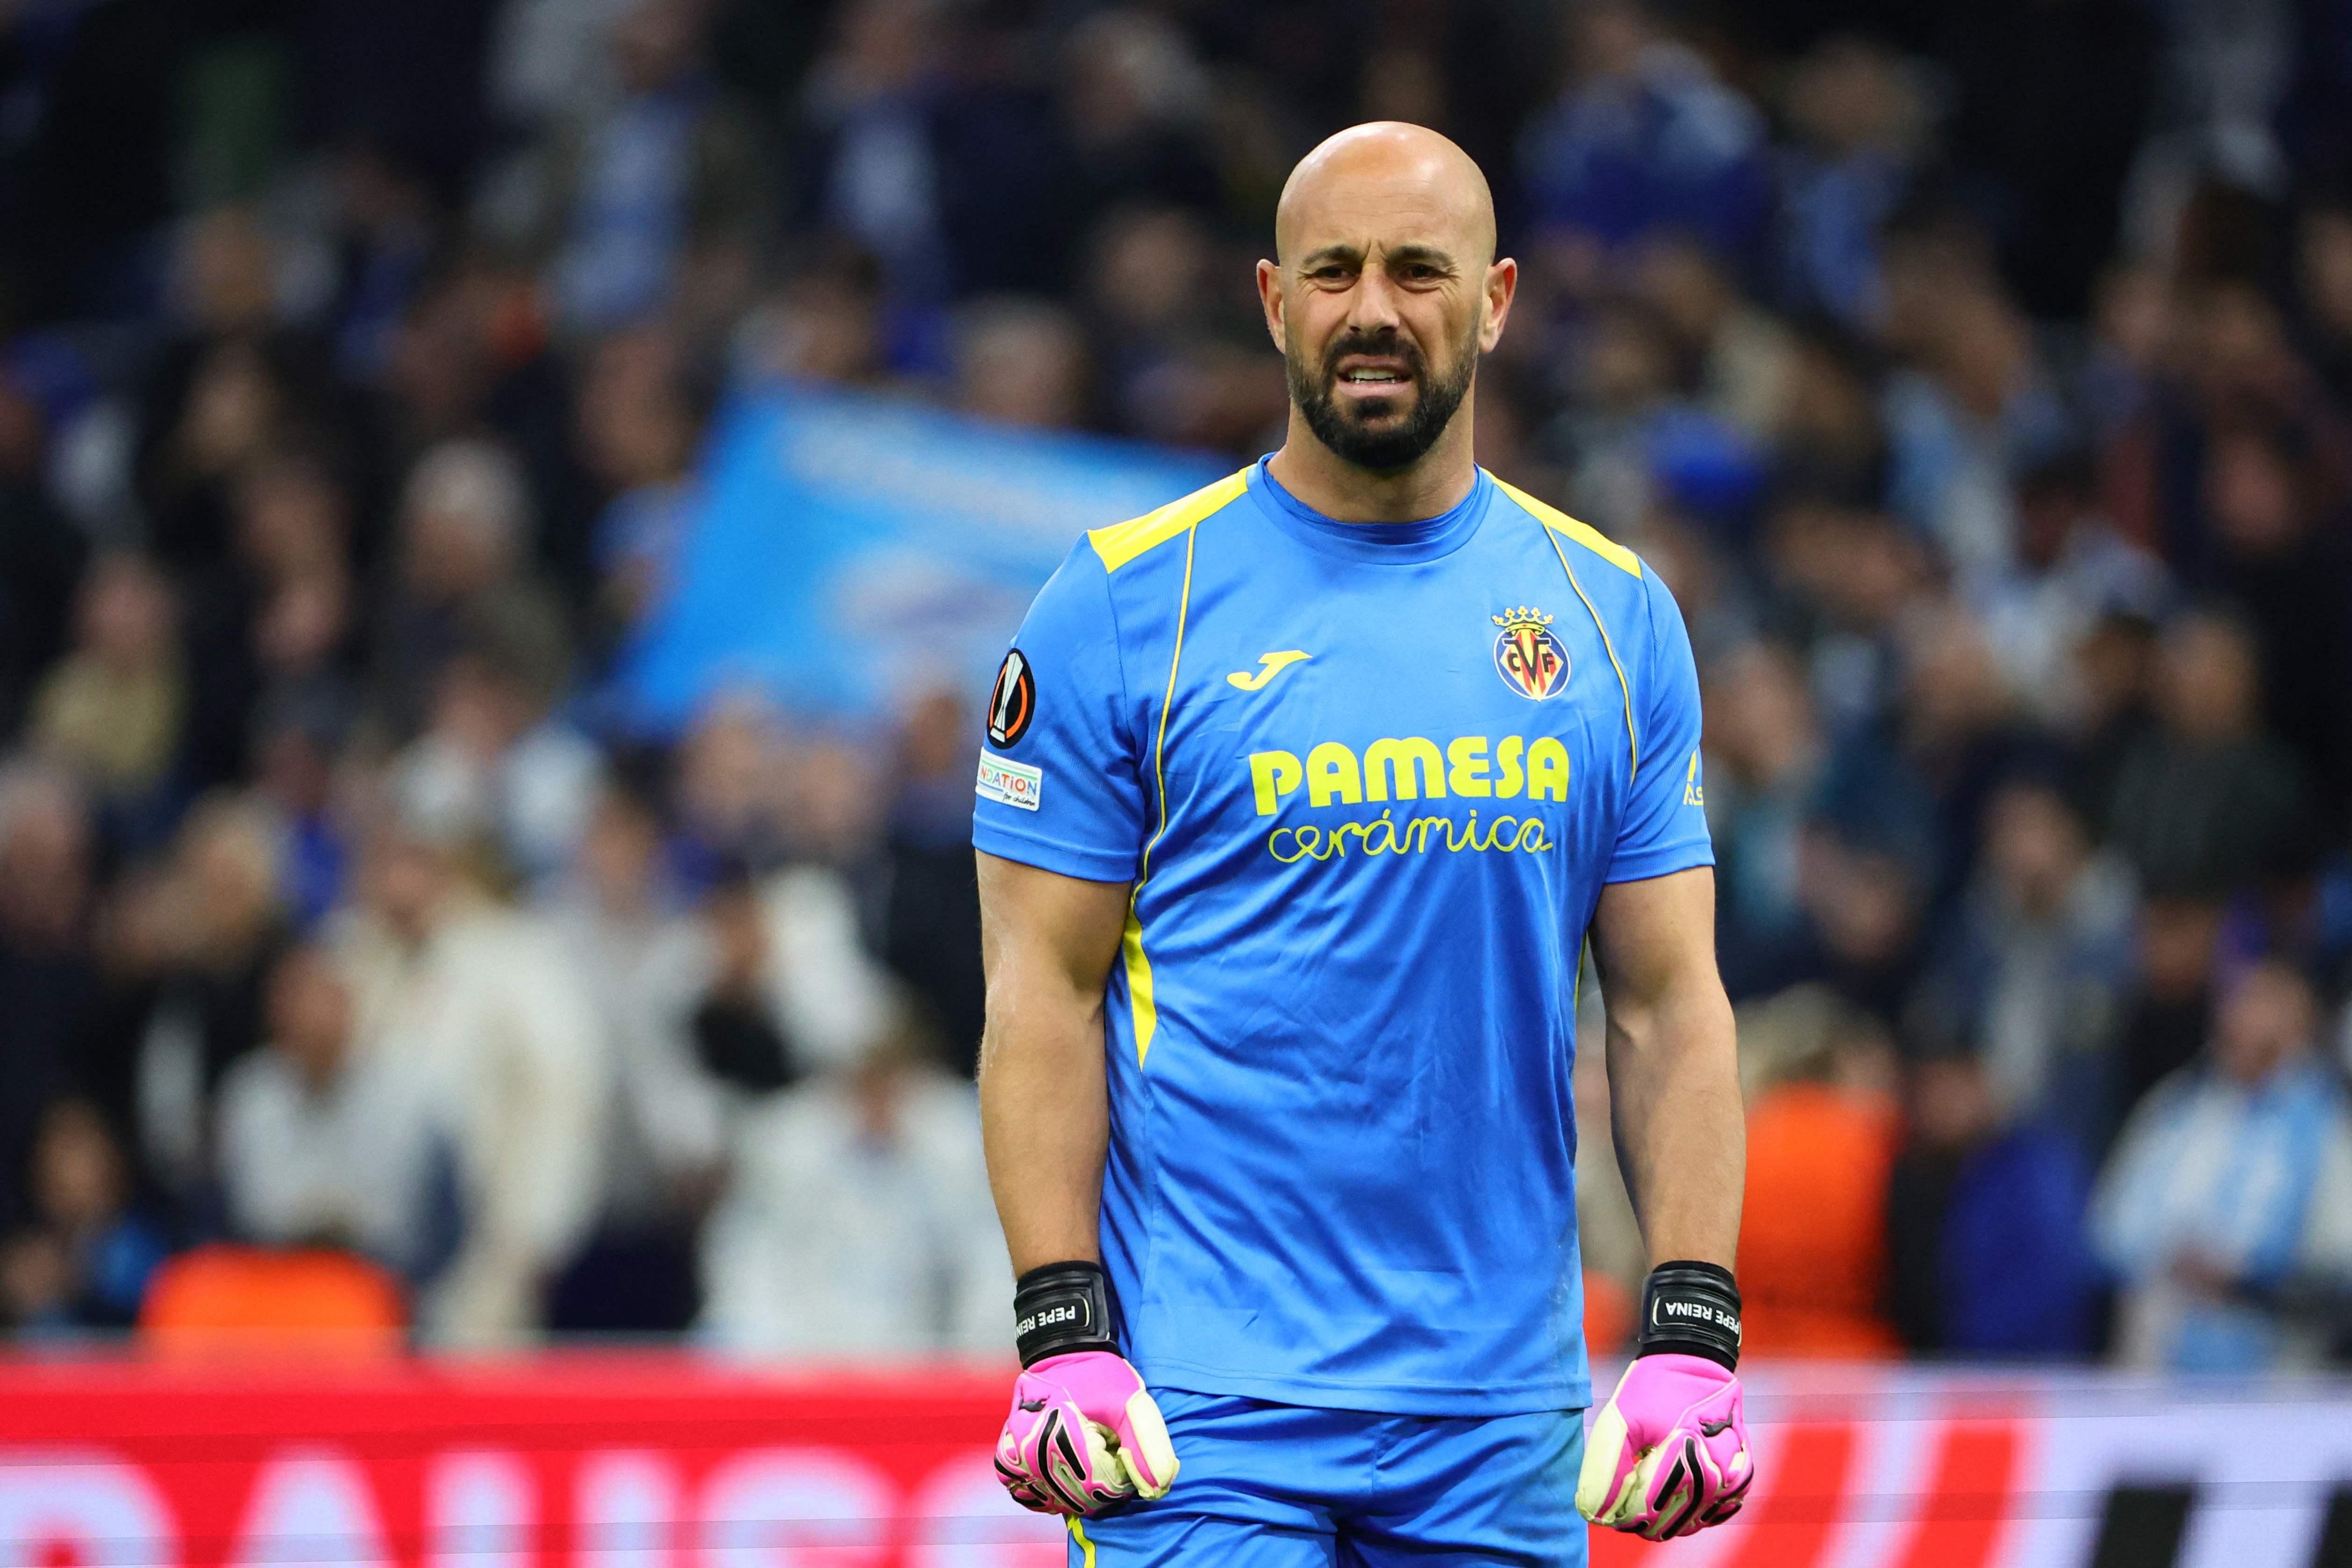 Villarreal's Spanish goalkeeper #01 Pepe Reina reacts during the UEFA Europa League round of 16 first-leg football match between Olympique de Marseille and Villareal CF at the Velodrome Stadium in Marseille, souteastern France, on March 7, 2024. (Photo by CLEMENT MAHOUDEAU / AFP)